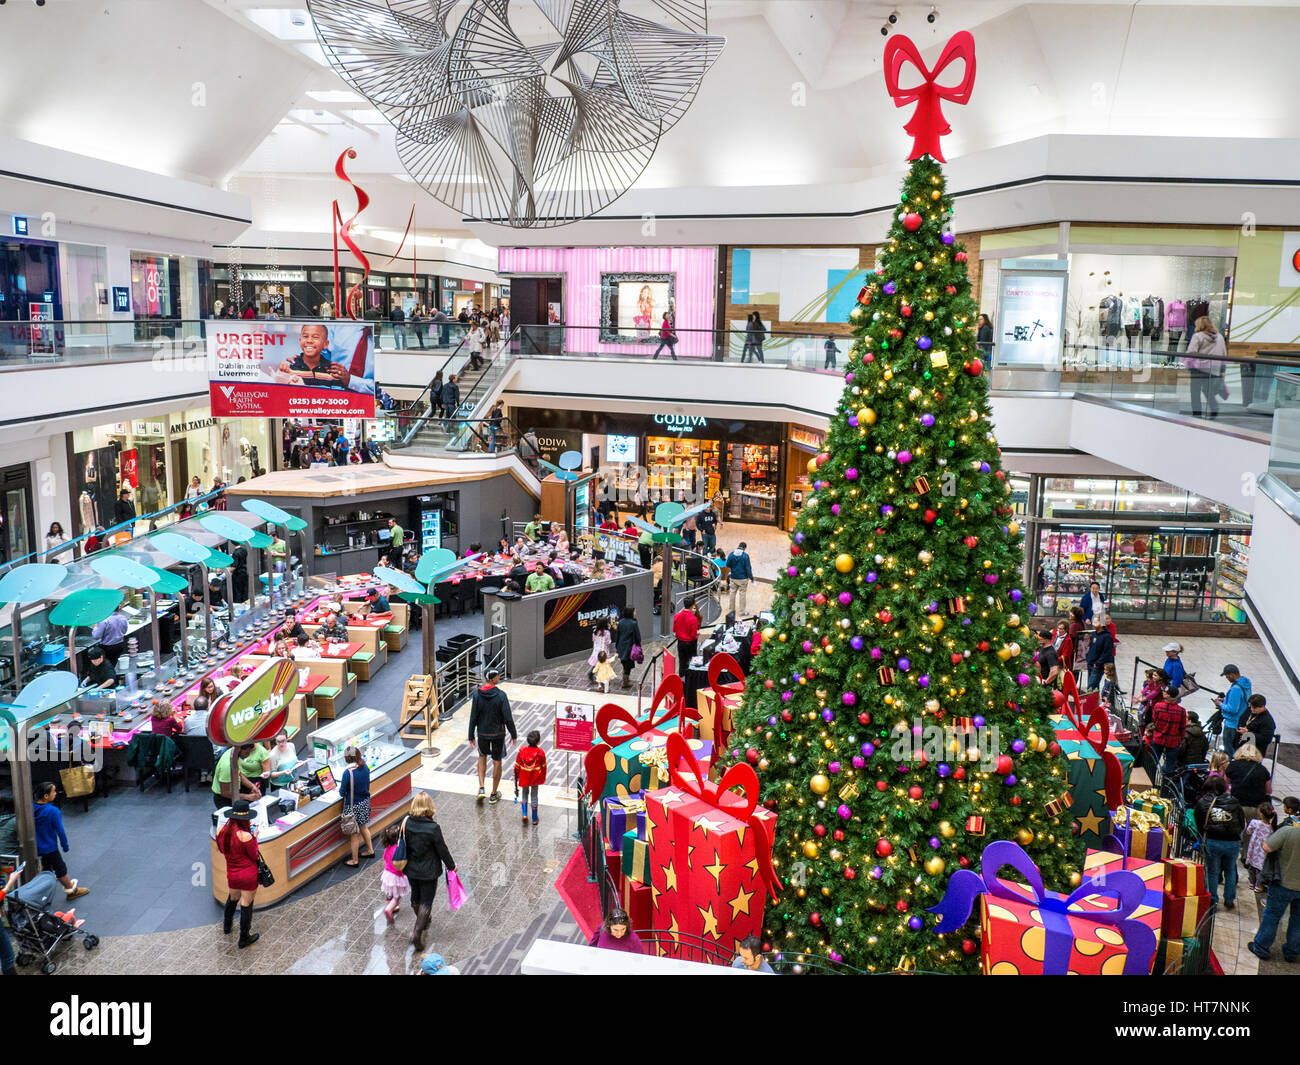 MACEY’S DEPARTMENT STORE INTERIOR CHRISTMAS beautifully decorated Christmas Tree with wrapped gifts at Macey's Store Plaza, Pleasanton California USA Stock Photo